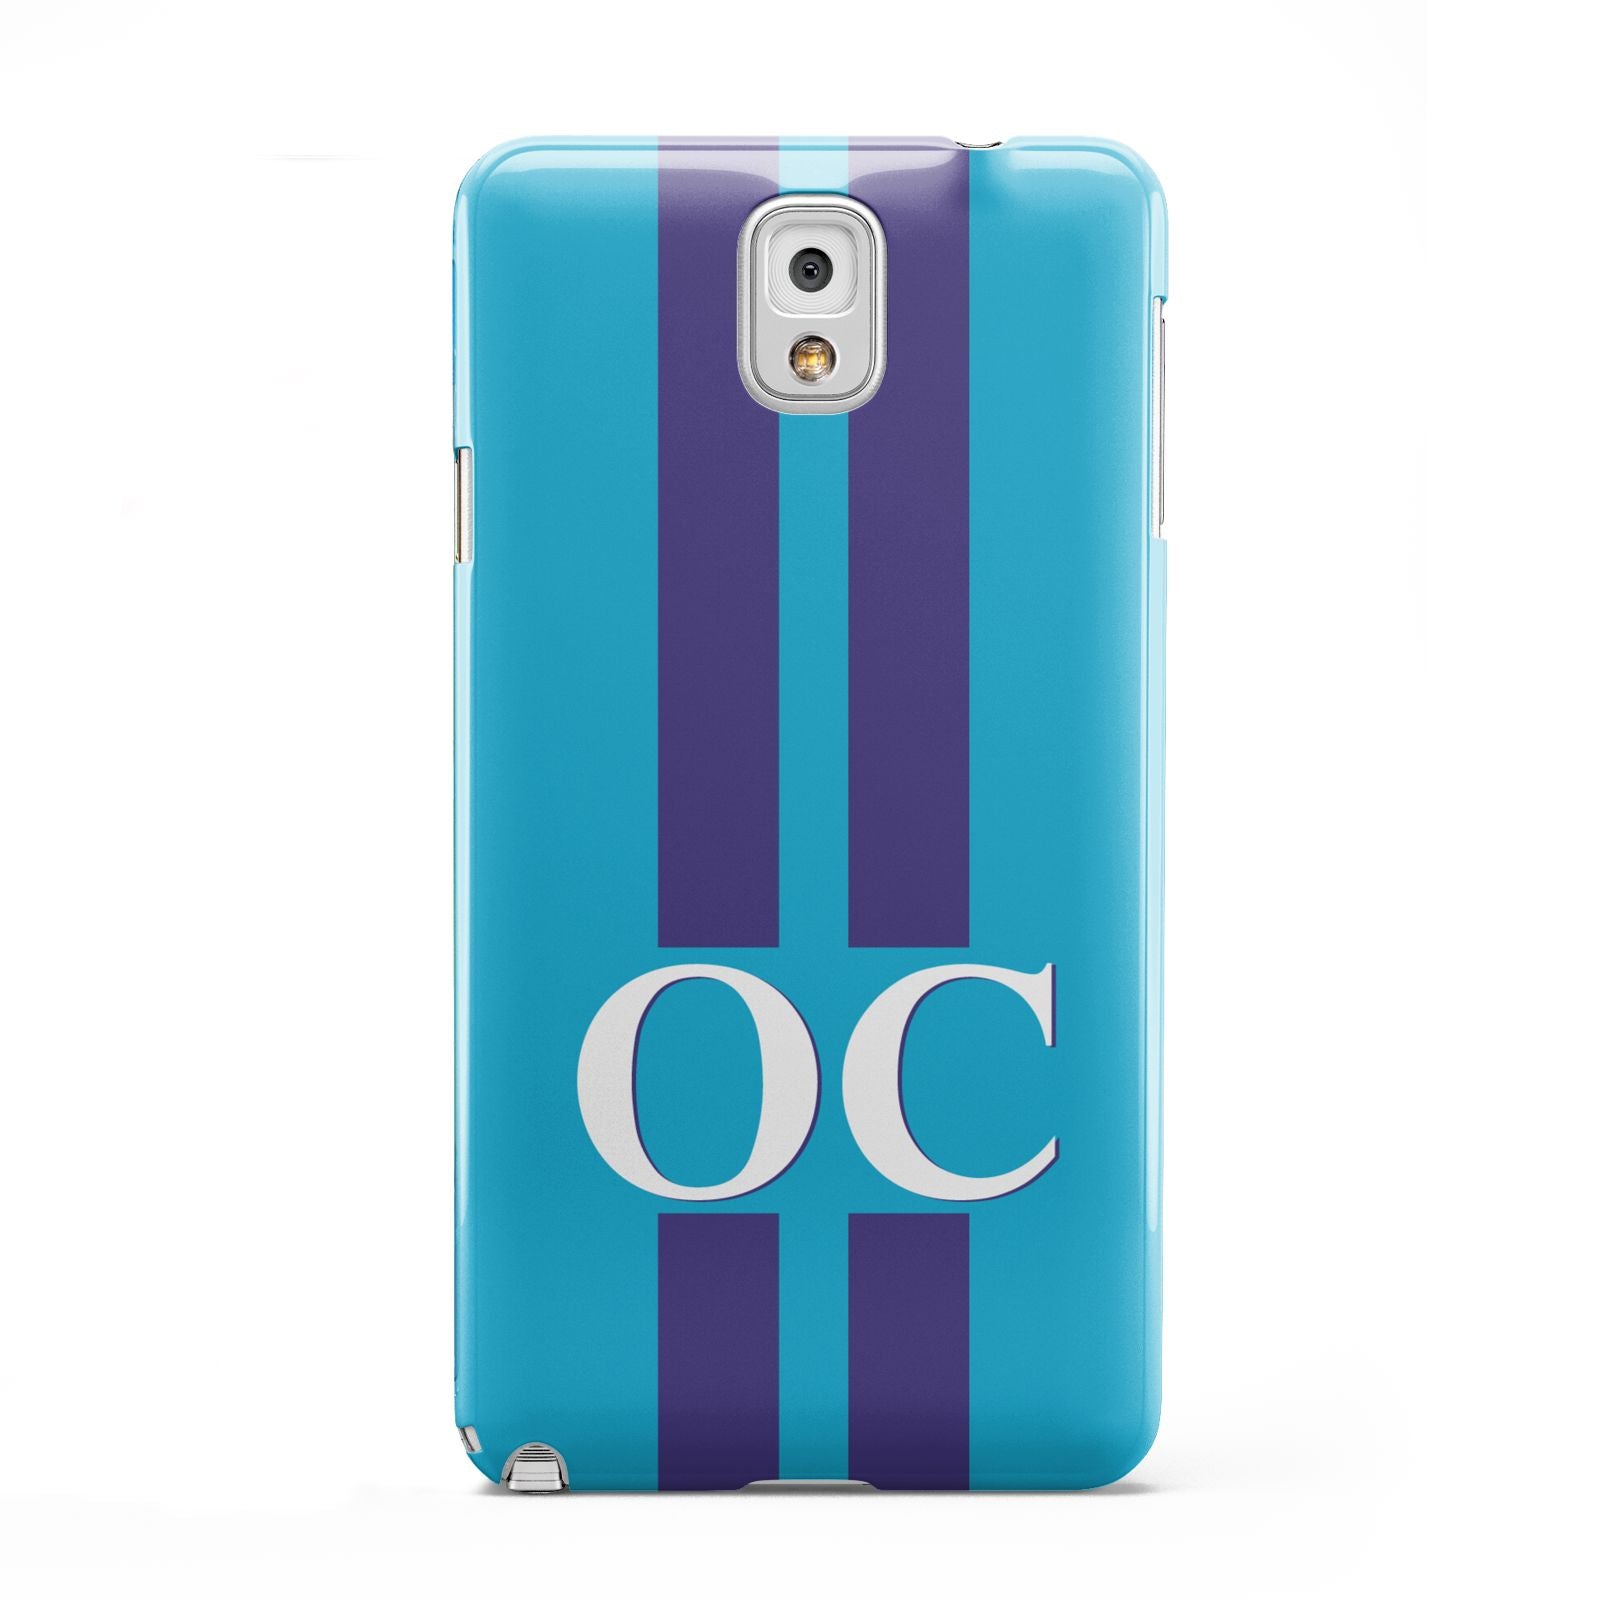 Turquoise Personalised Samsung Galaxy Note 3 Case